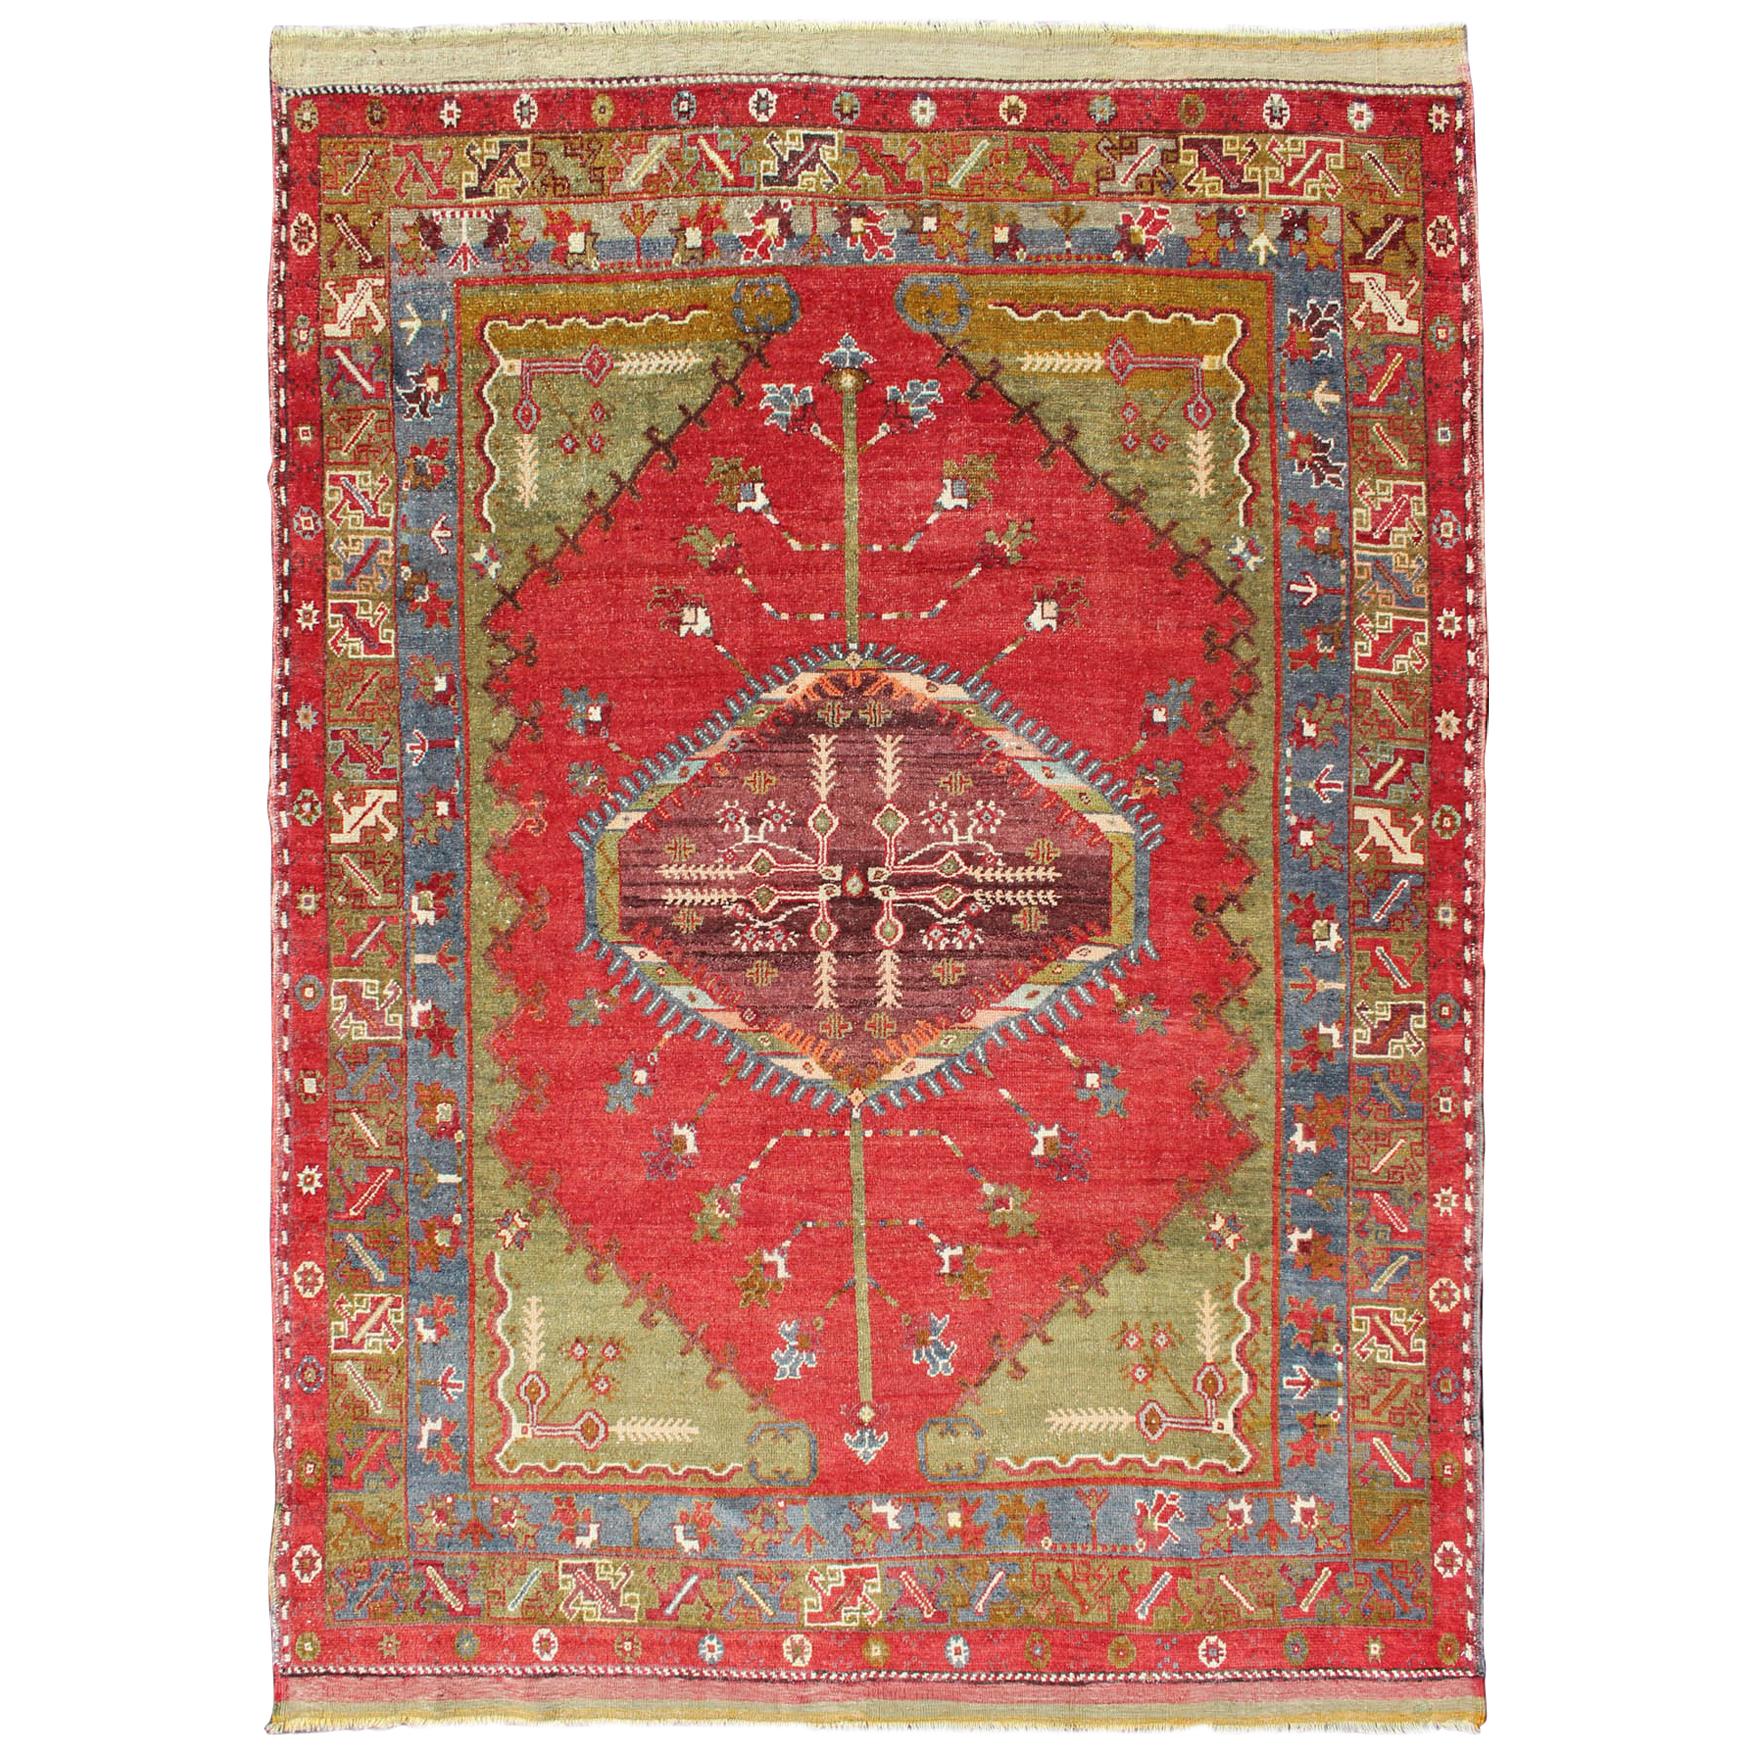 Antique Turkish Medallion Oushak Rug in Teal Green, Rose and Buttery